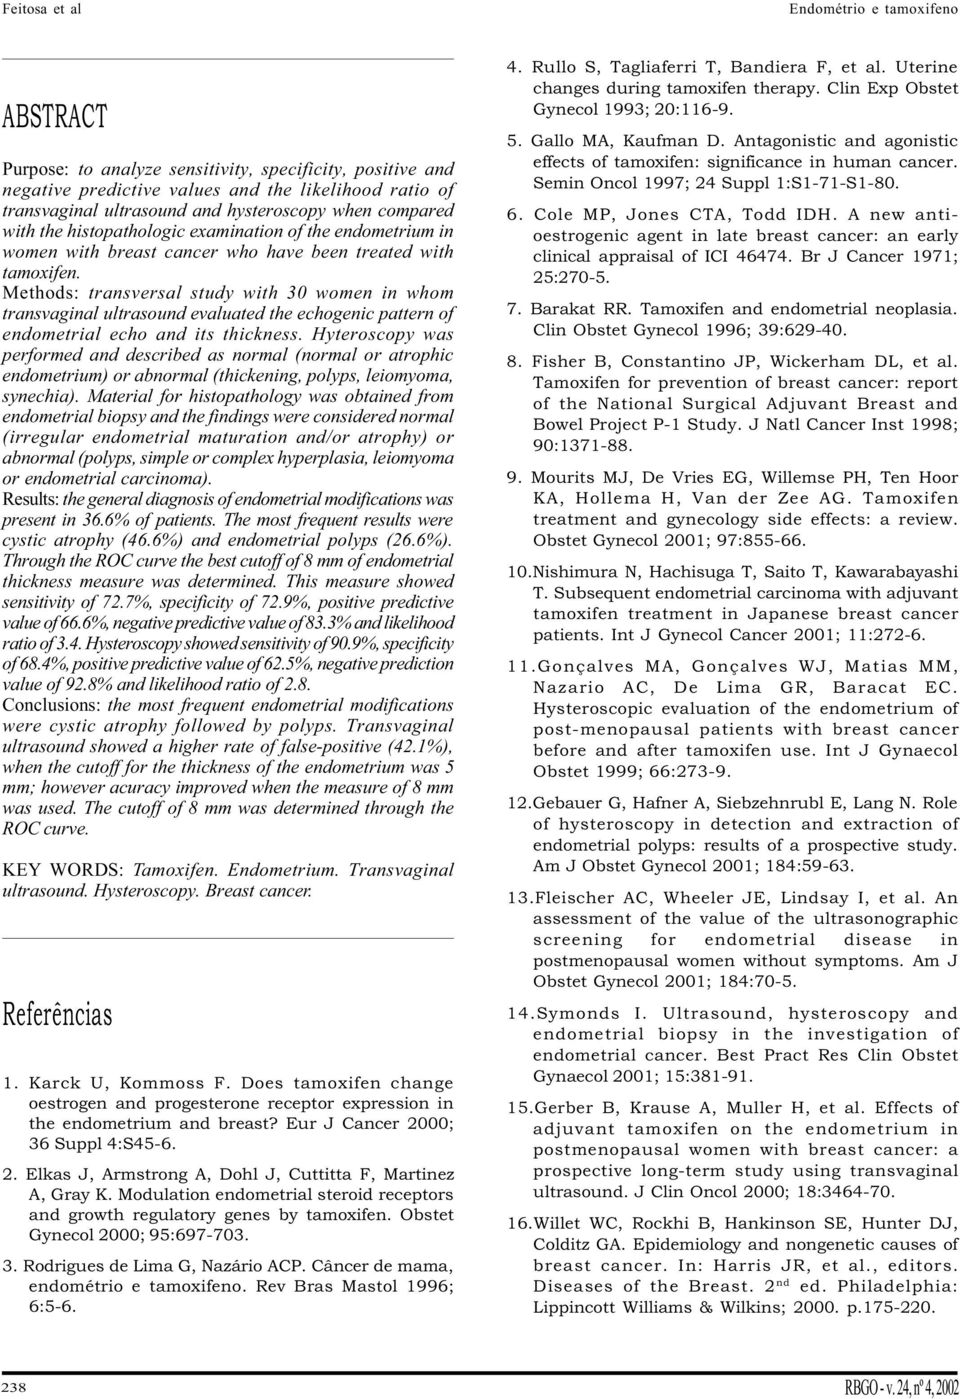 Methods: transversal study with 30 women in whom transvaginal ultrasound evaluated the echogenic pattern of endometrial echo and its thickness.